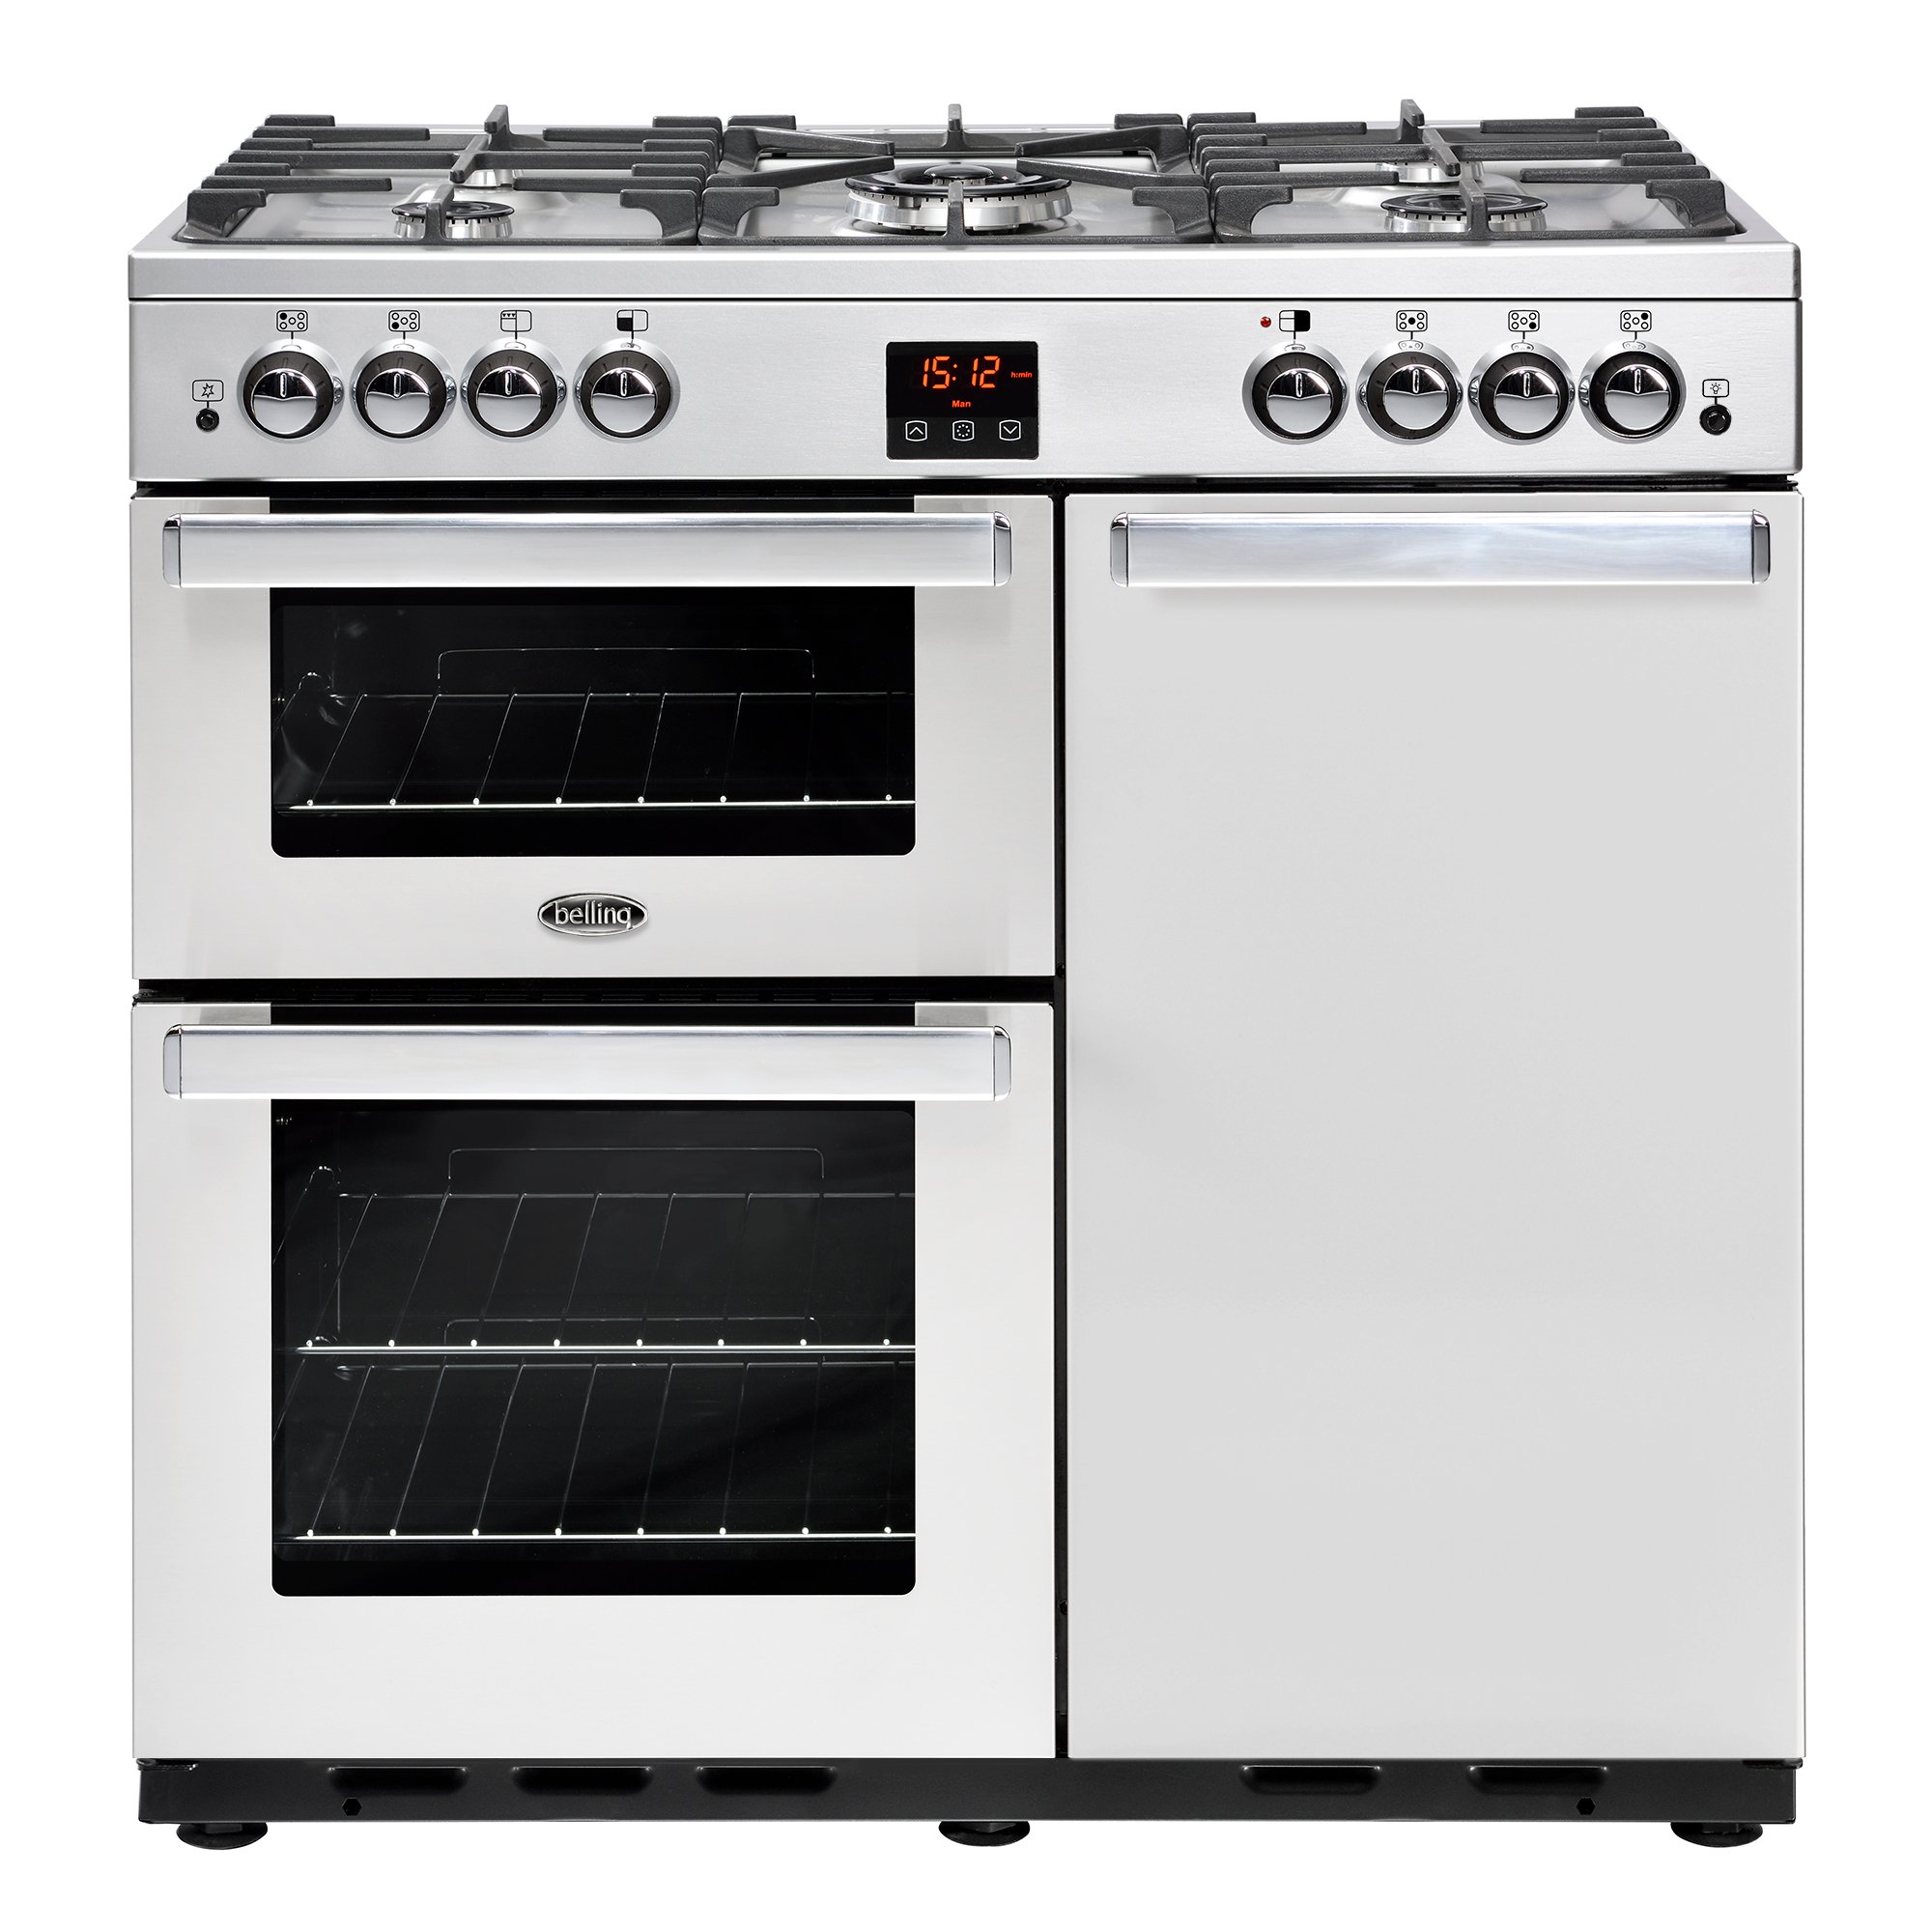 90cm gas range cooker with 5 burner gas hob, separate grill, conventional main oven and tall fanned electric oven.